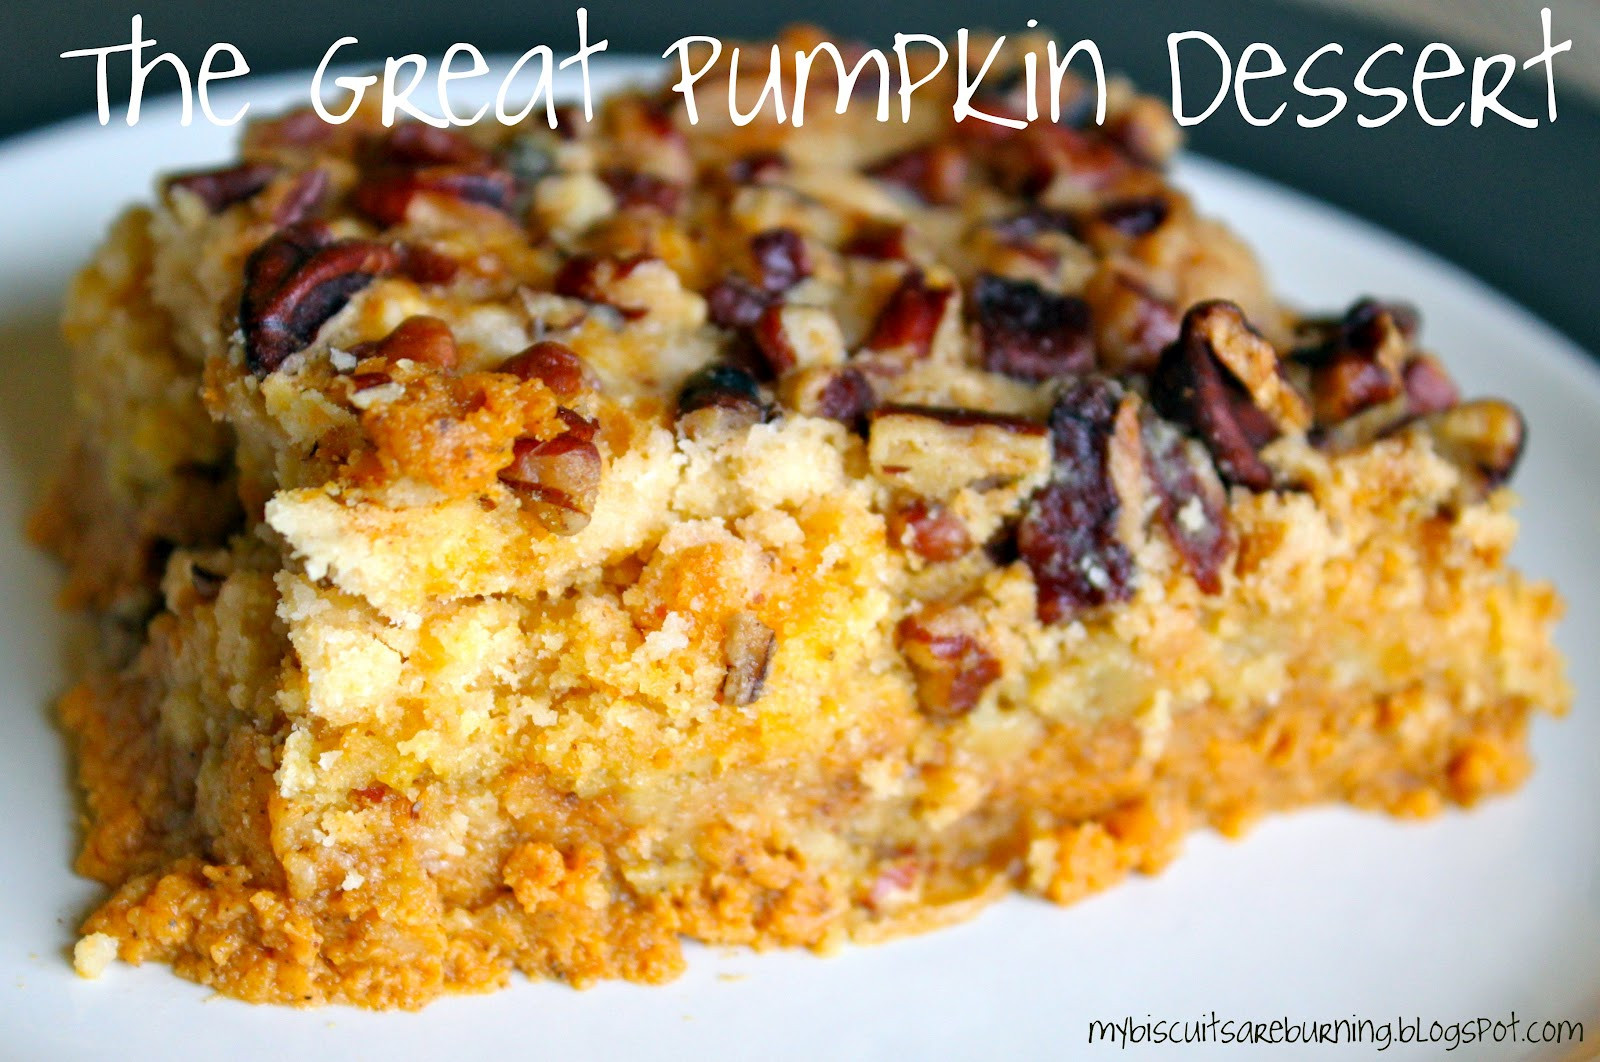 Great Dessert Recipes
 My Biscuits are Burning It s The Great Pumpkin Dessert